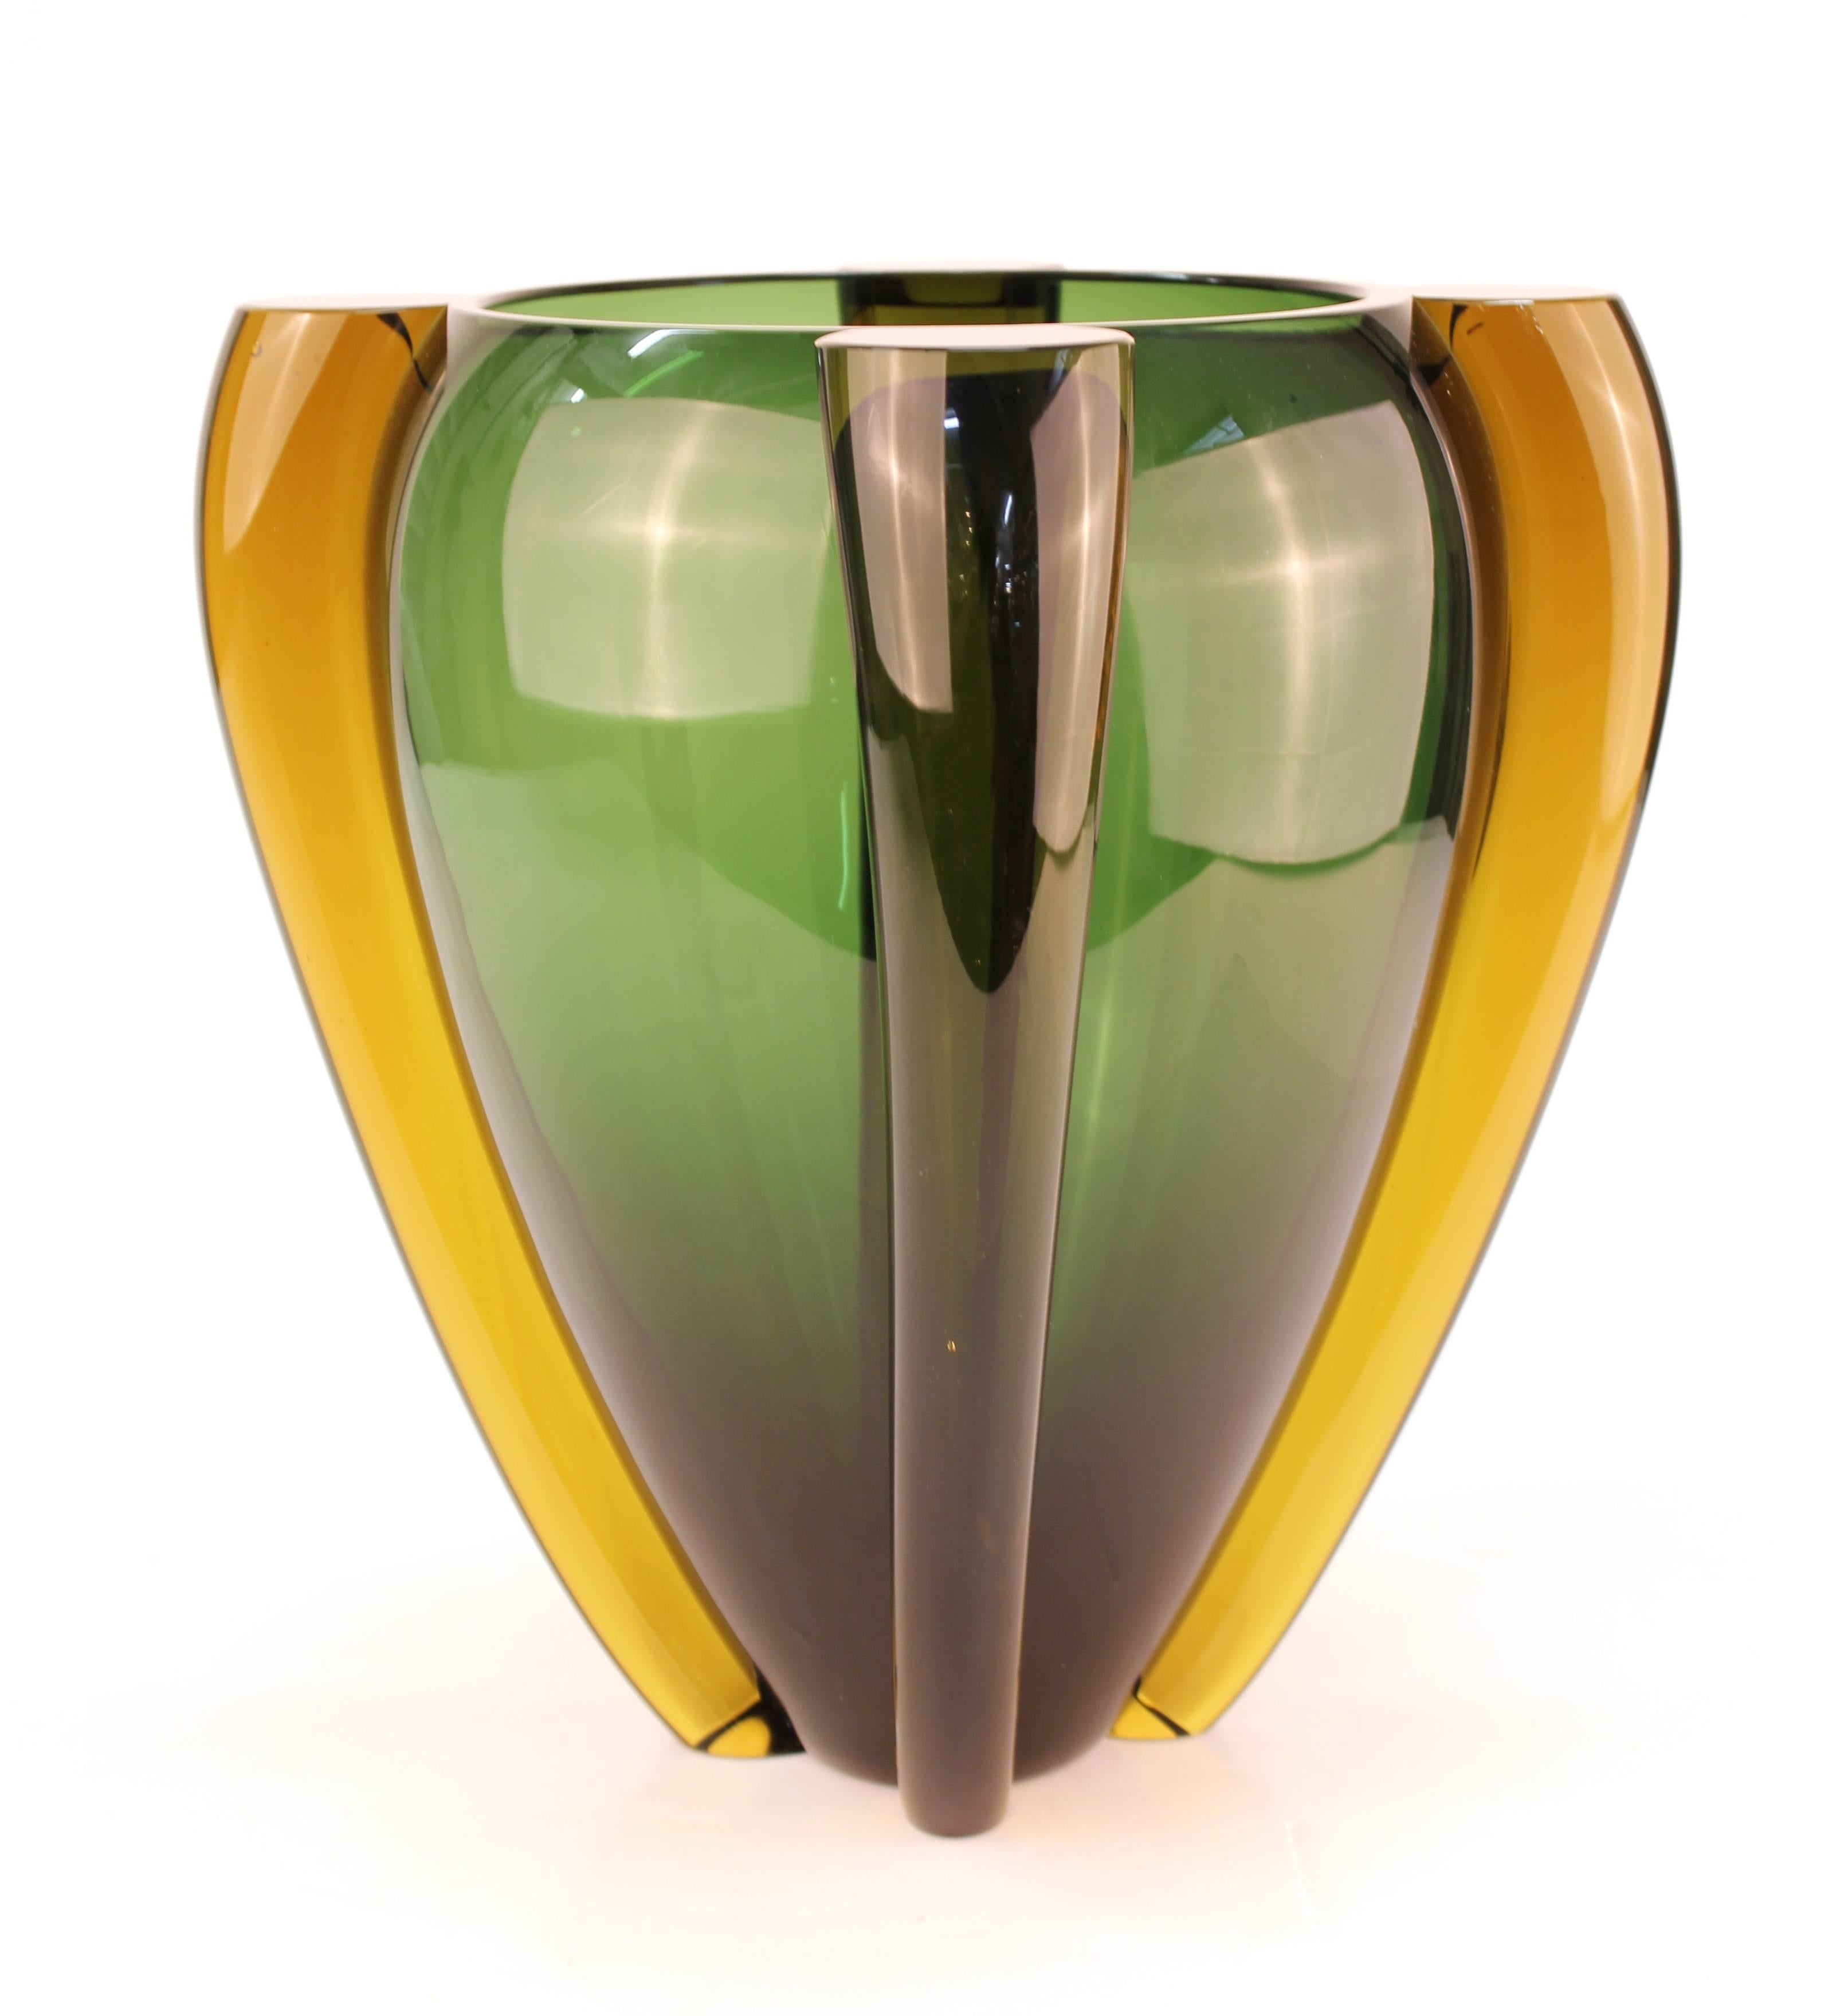 Italian Murano art glass vase made by Tina Aufiero for Venini. The piece has a label and is signed and marked on the bottom. Some minor wear to the bottom, but in overall great vintage condition.